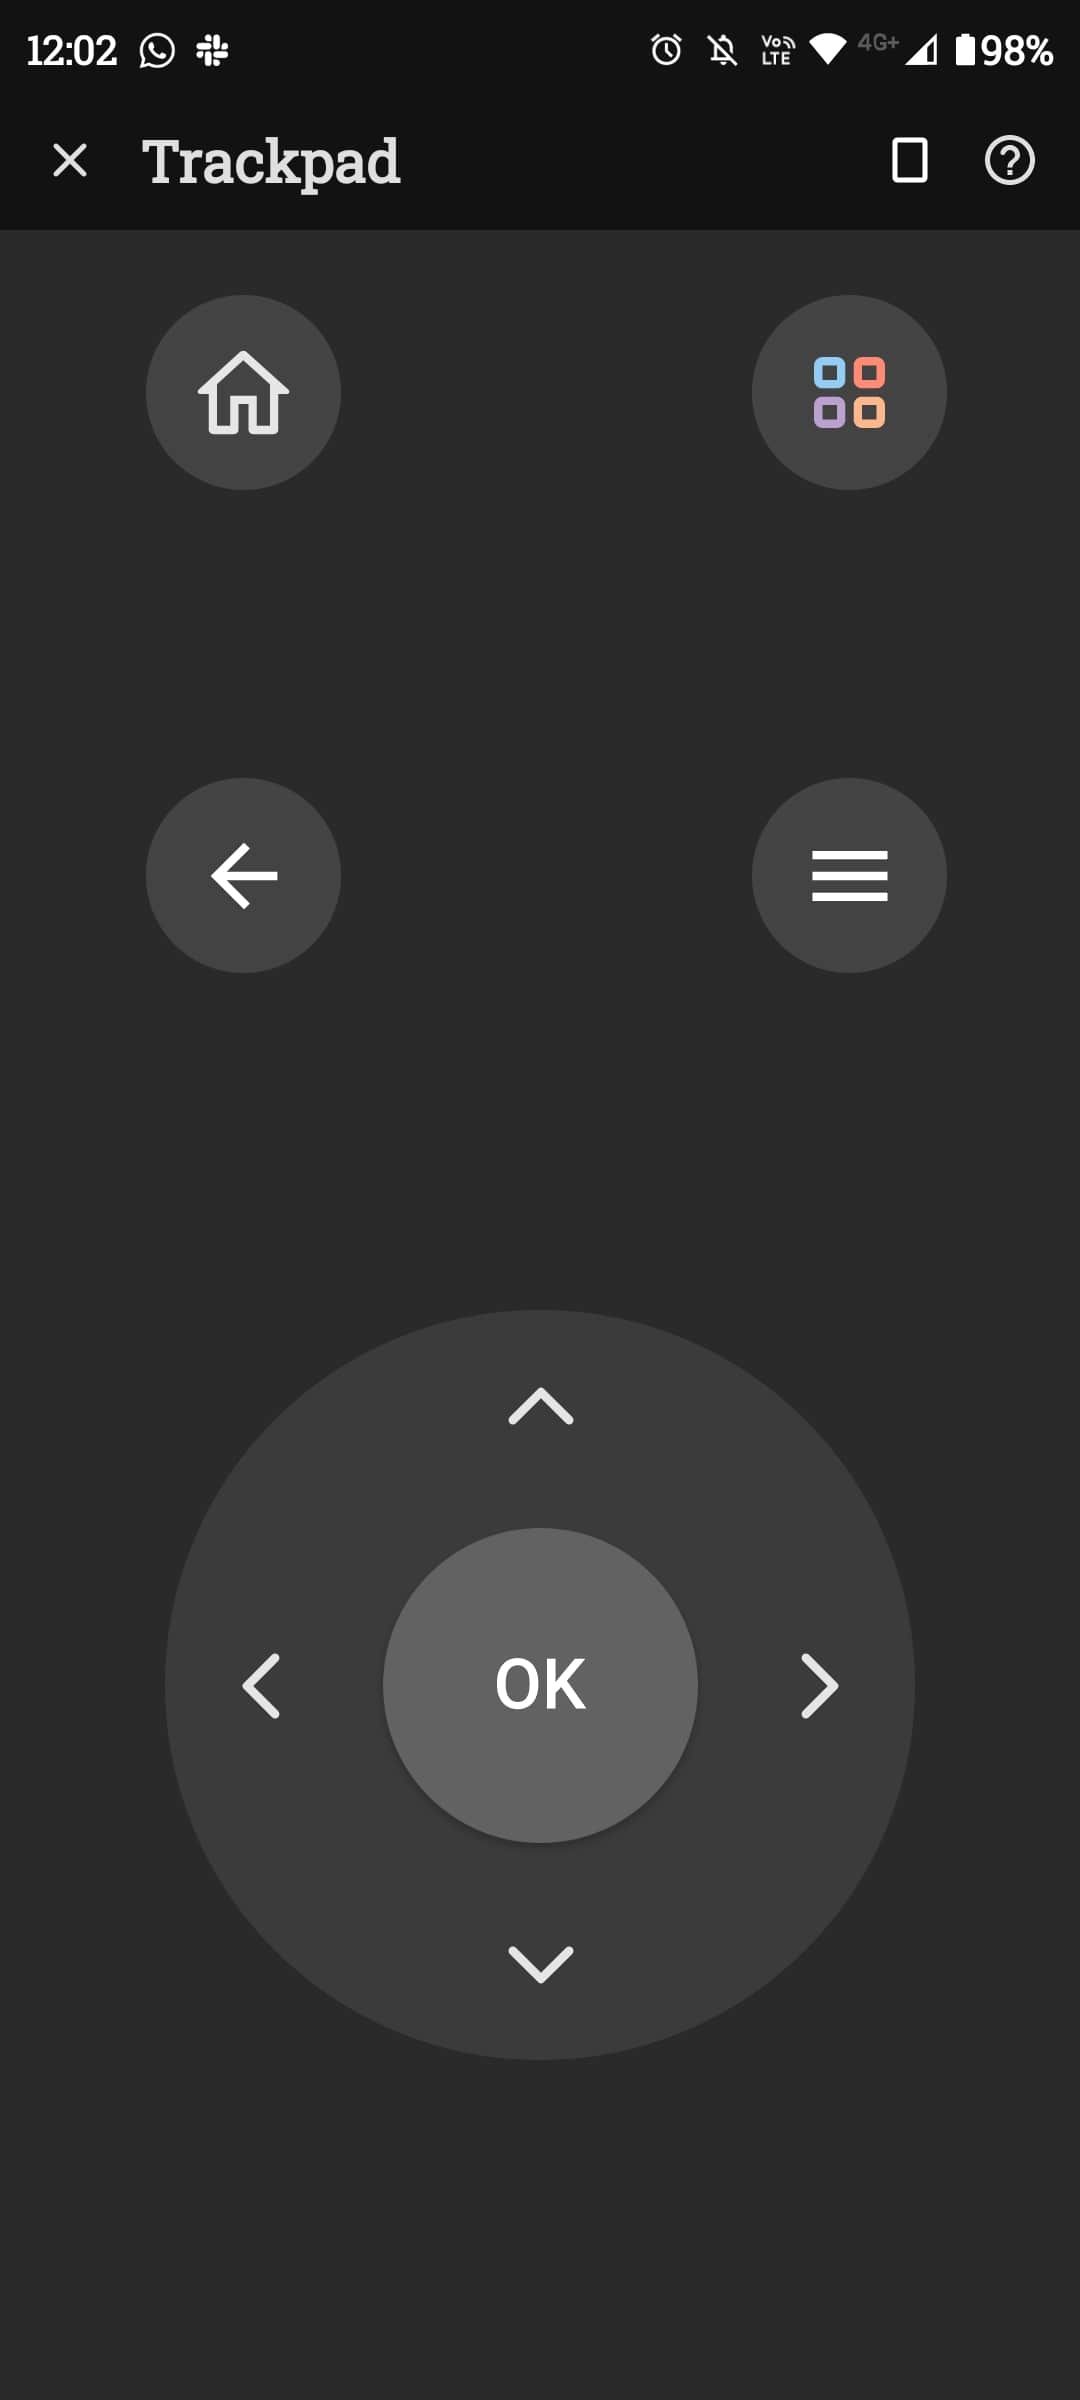 Remote control layout on mobile phone screen